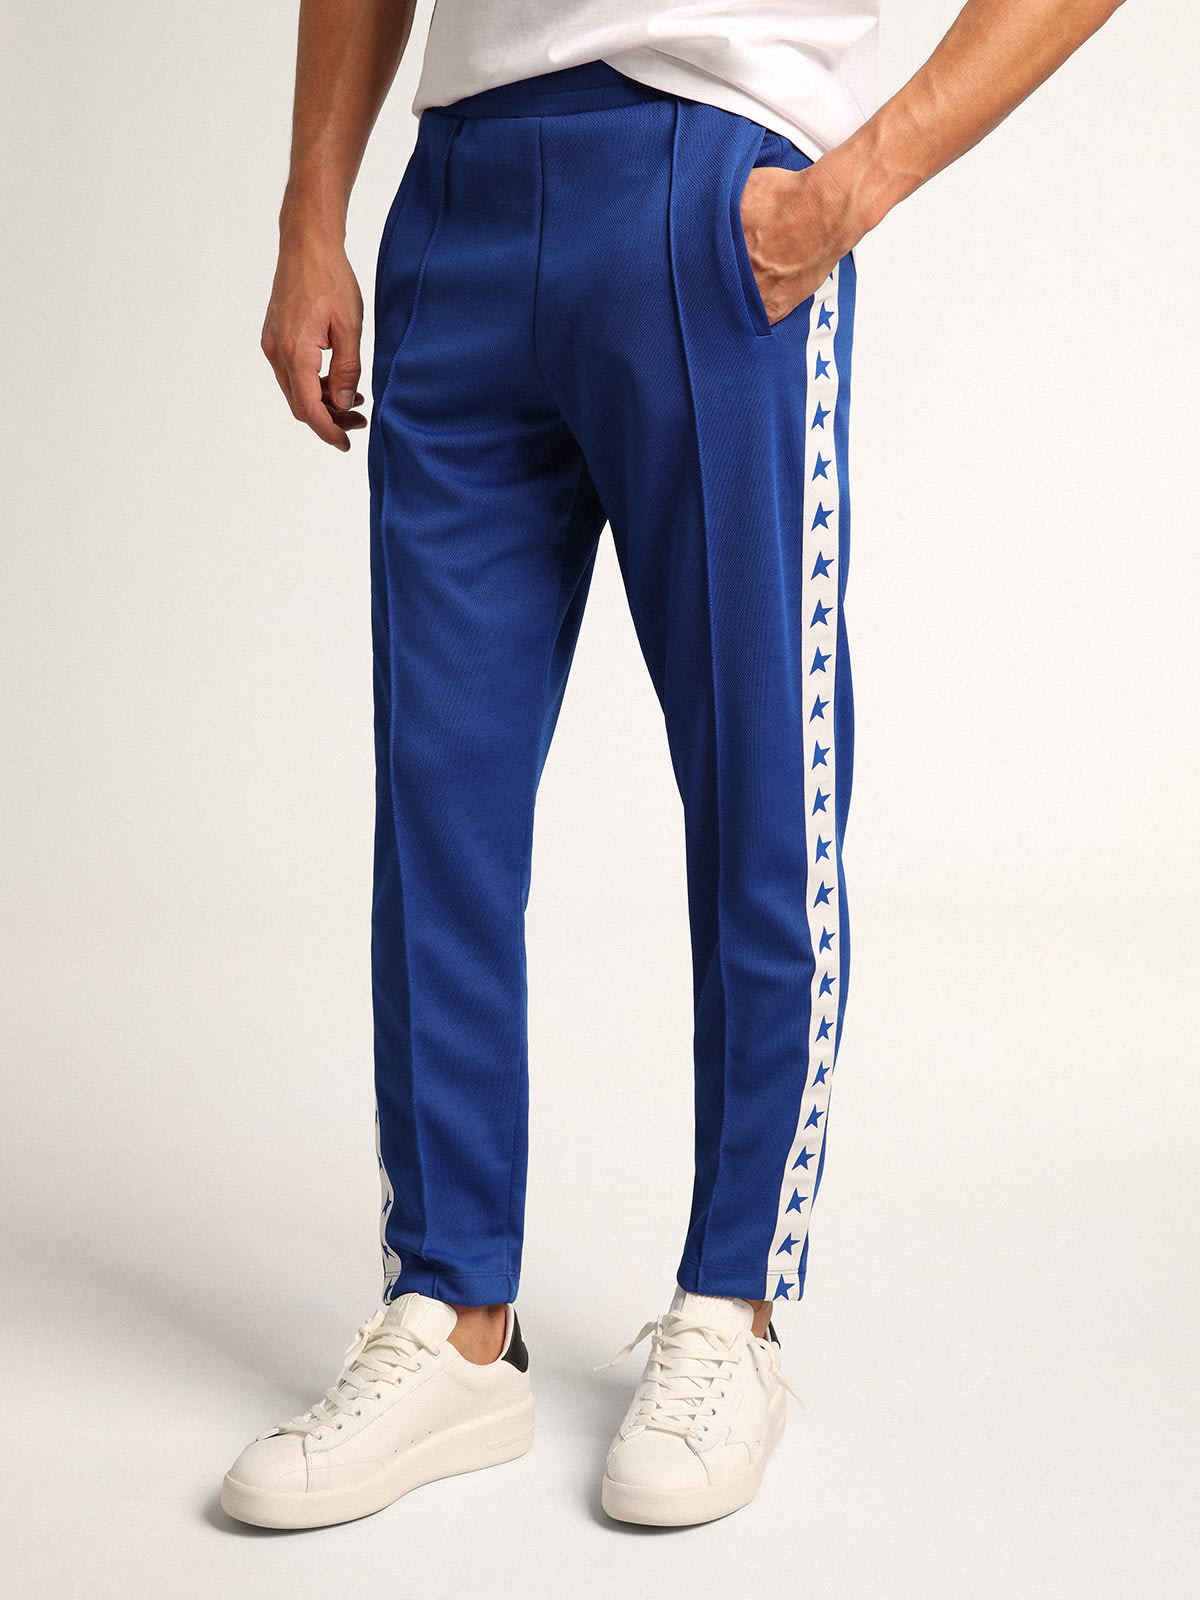 Golden Goose - Men’s bright blue joggers with stars on the sides in 